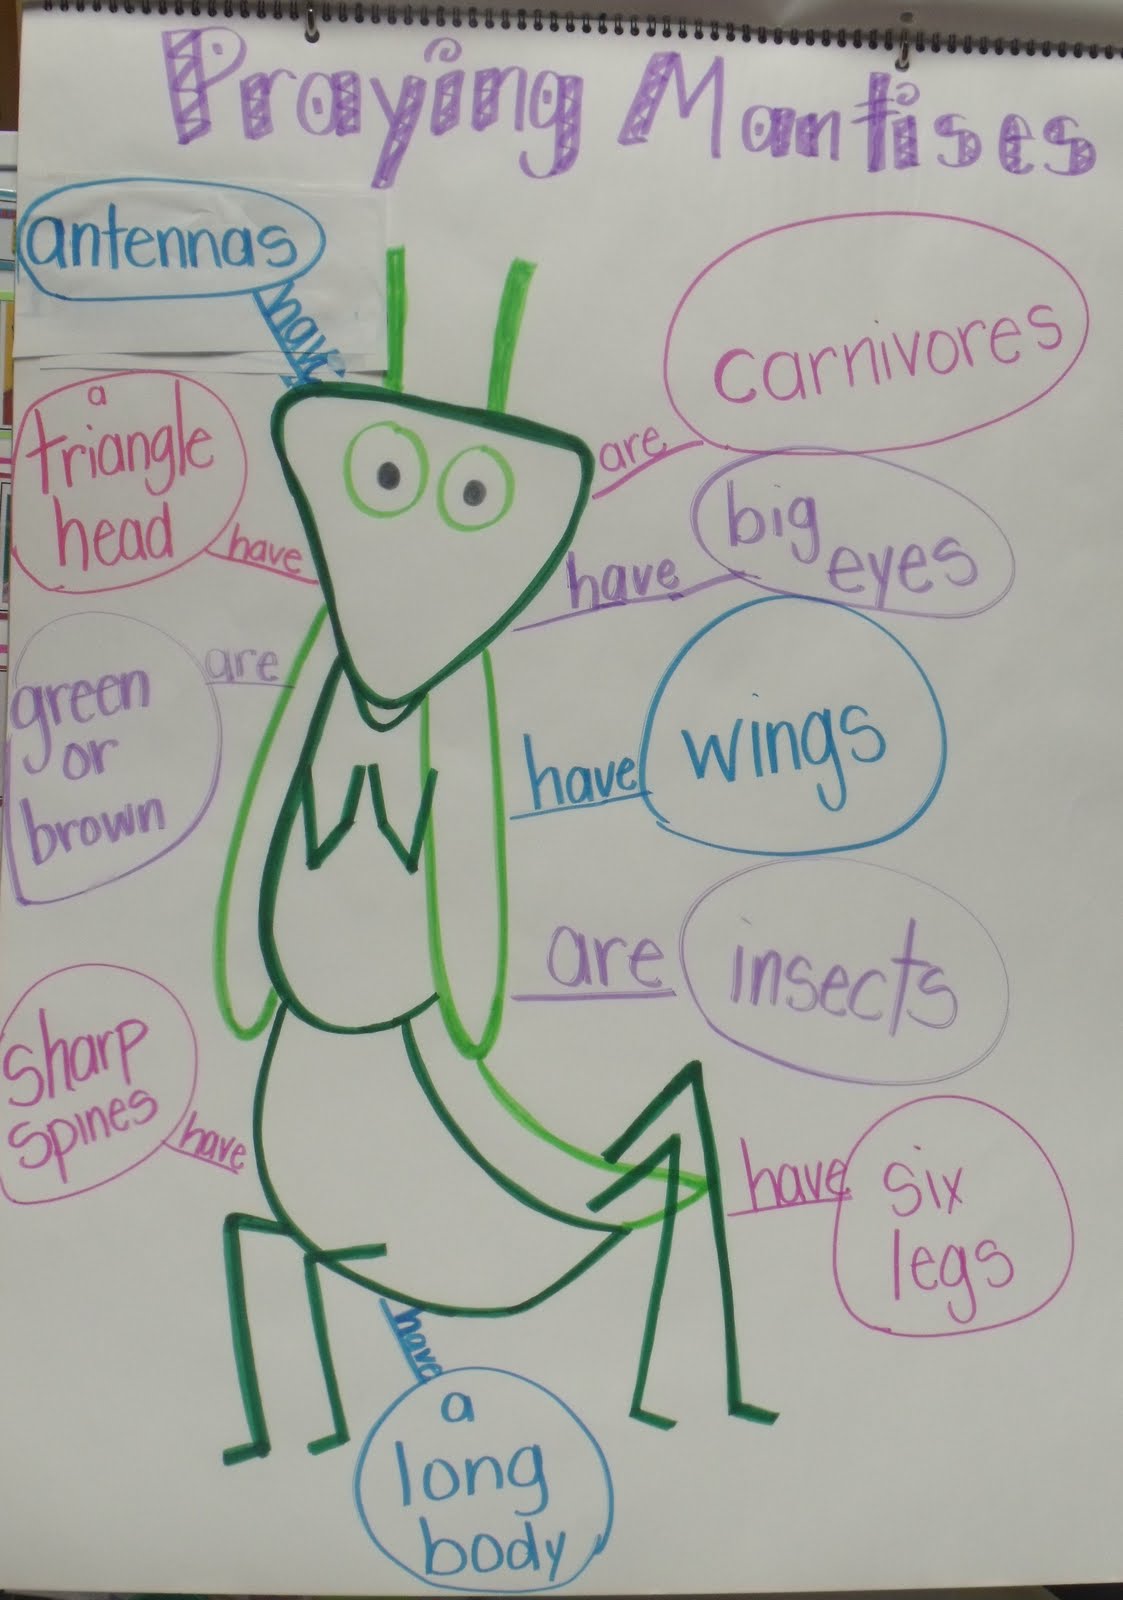 What is the life span of a praying mantis?